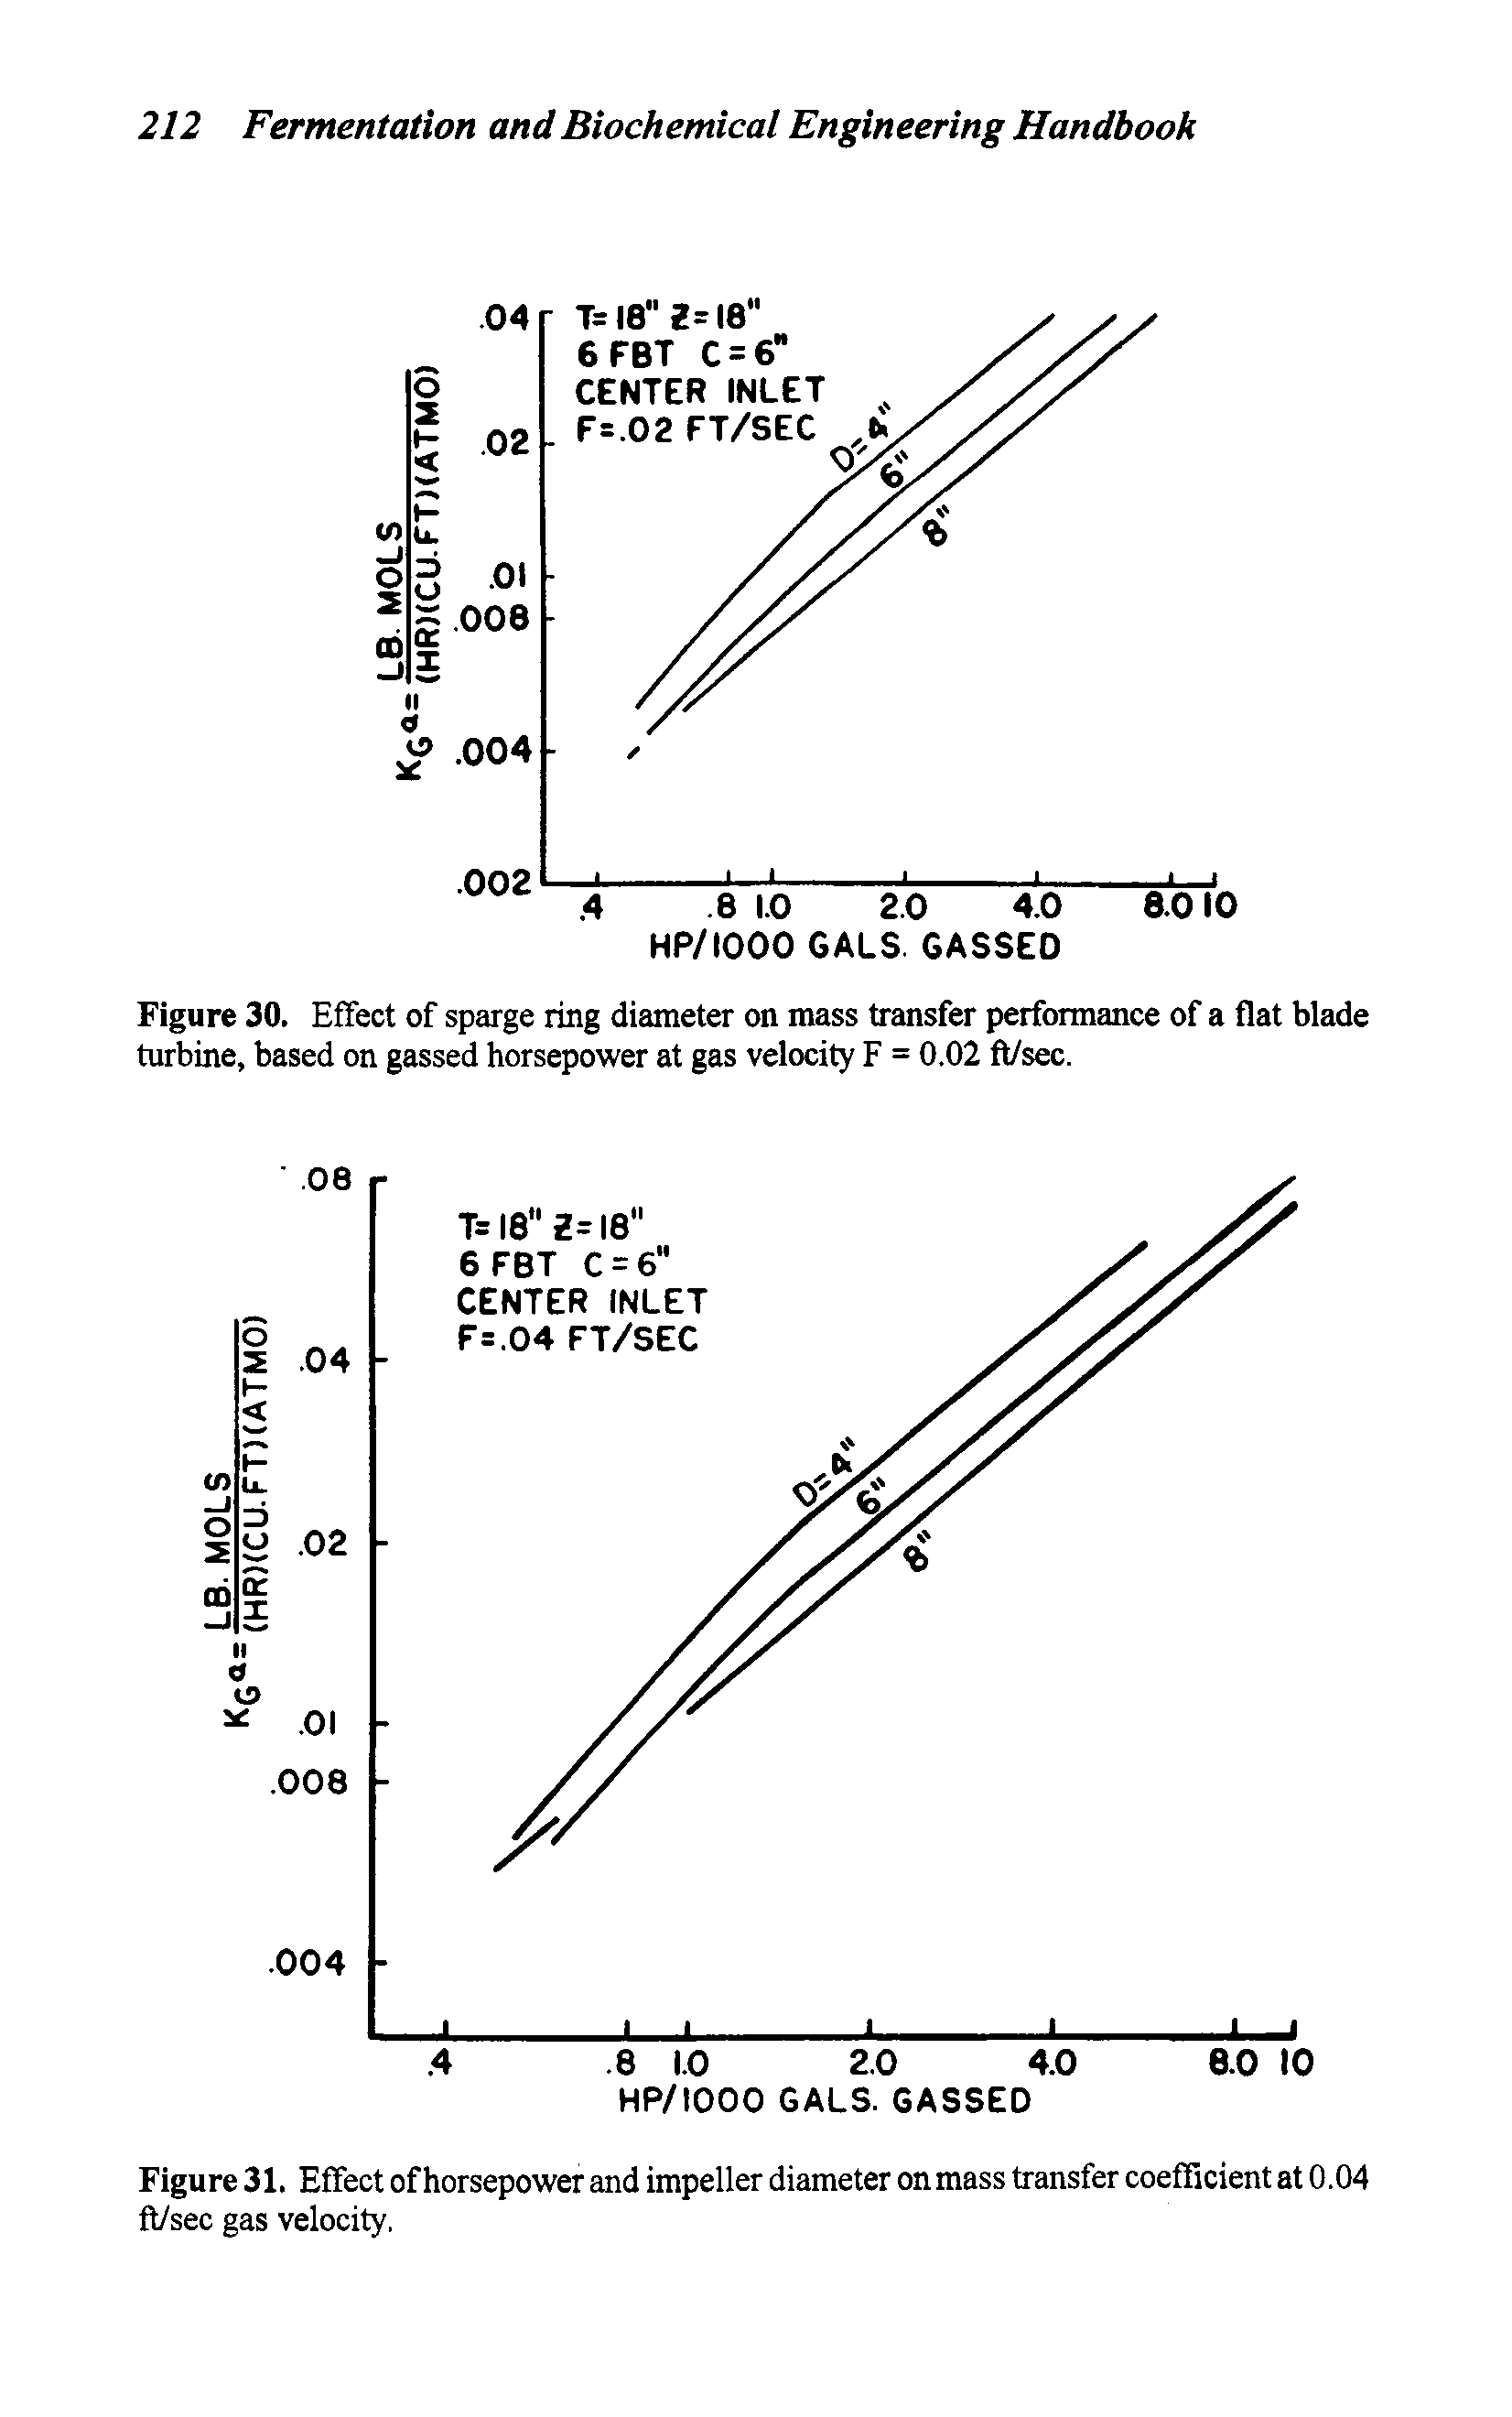 Figure 30. Effect of sparge ring diameter on mass transfer performance of a flat blade turbine, based on gassed horsepower at gas velocity F = 0.02 ft/sec.